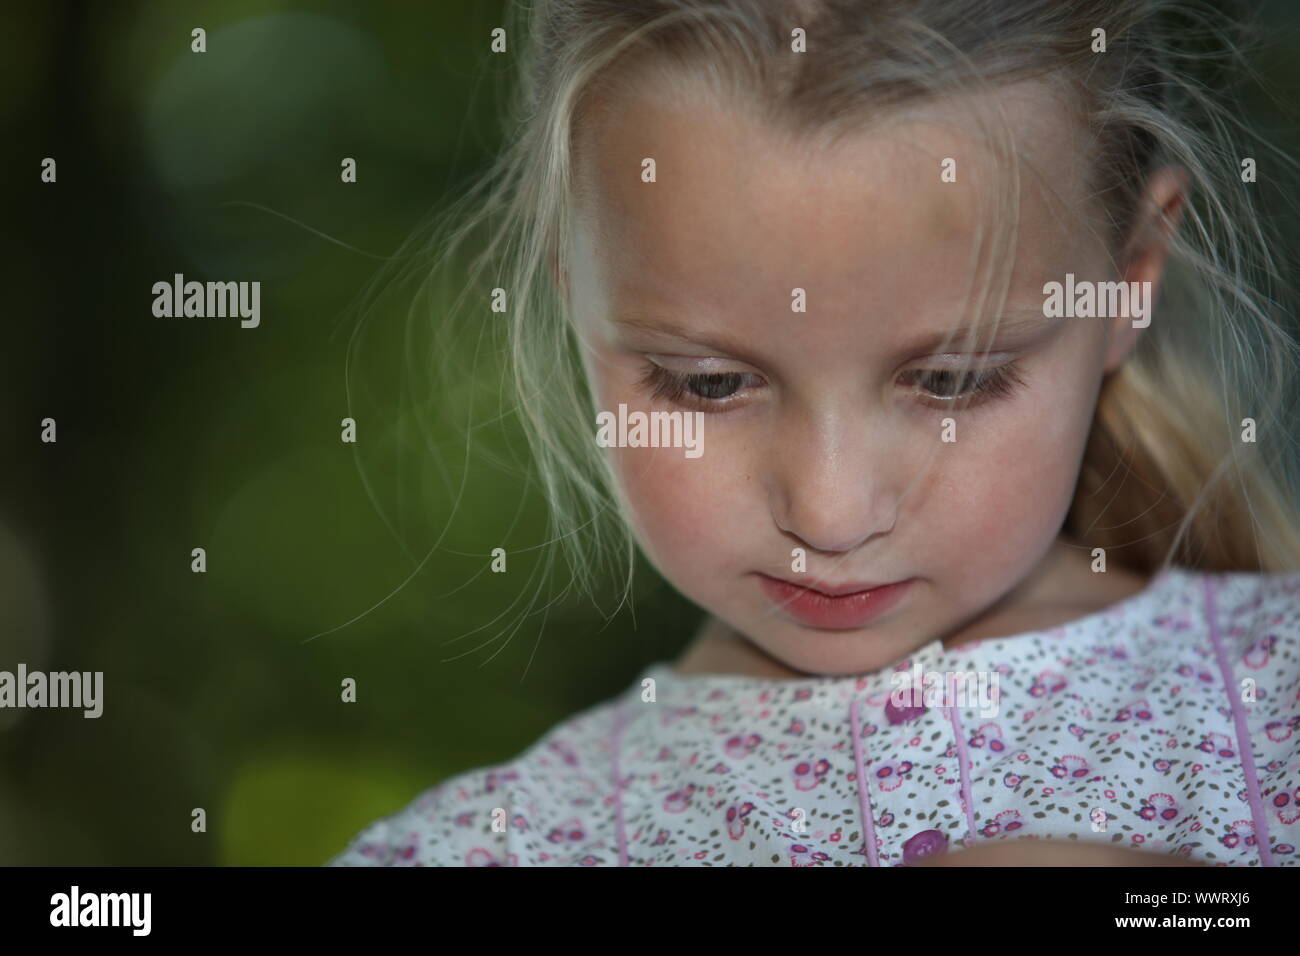 close shot of fair-haired schoolgirl with downcast eyes Stock Photo